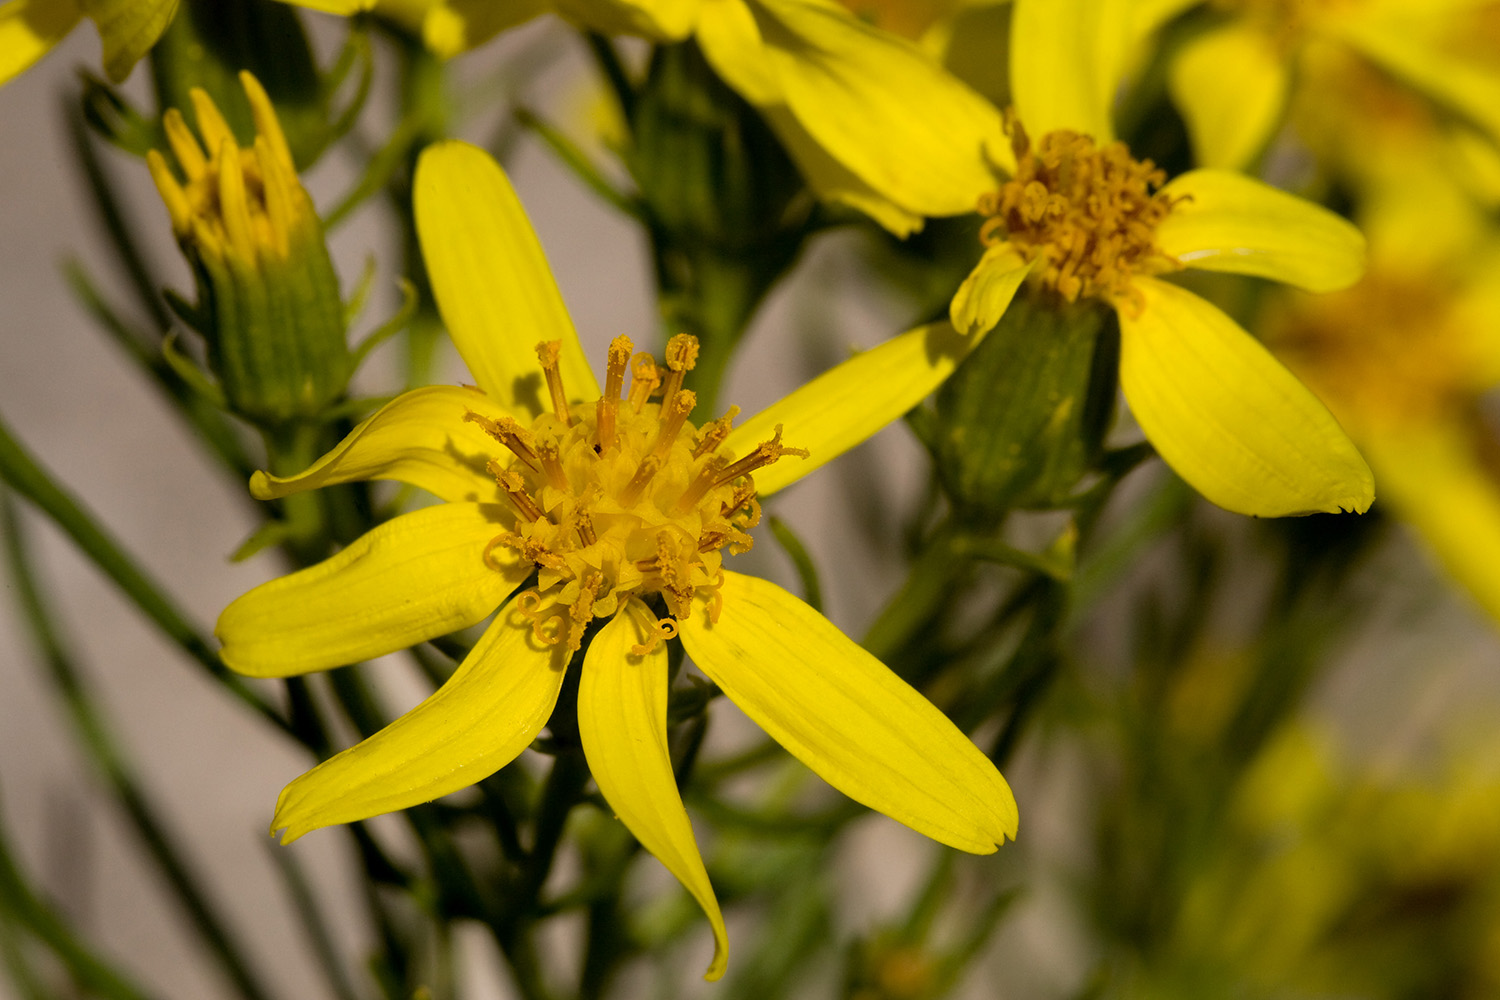 Widely spaced yellow rays and darker yellow disk flowers, which are quite distinct in this Senecio warnockii specimen